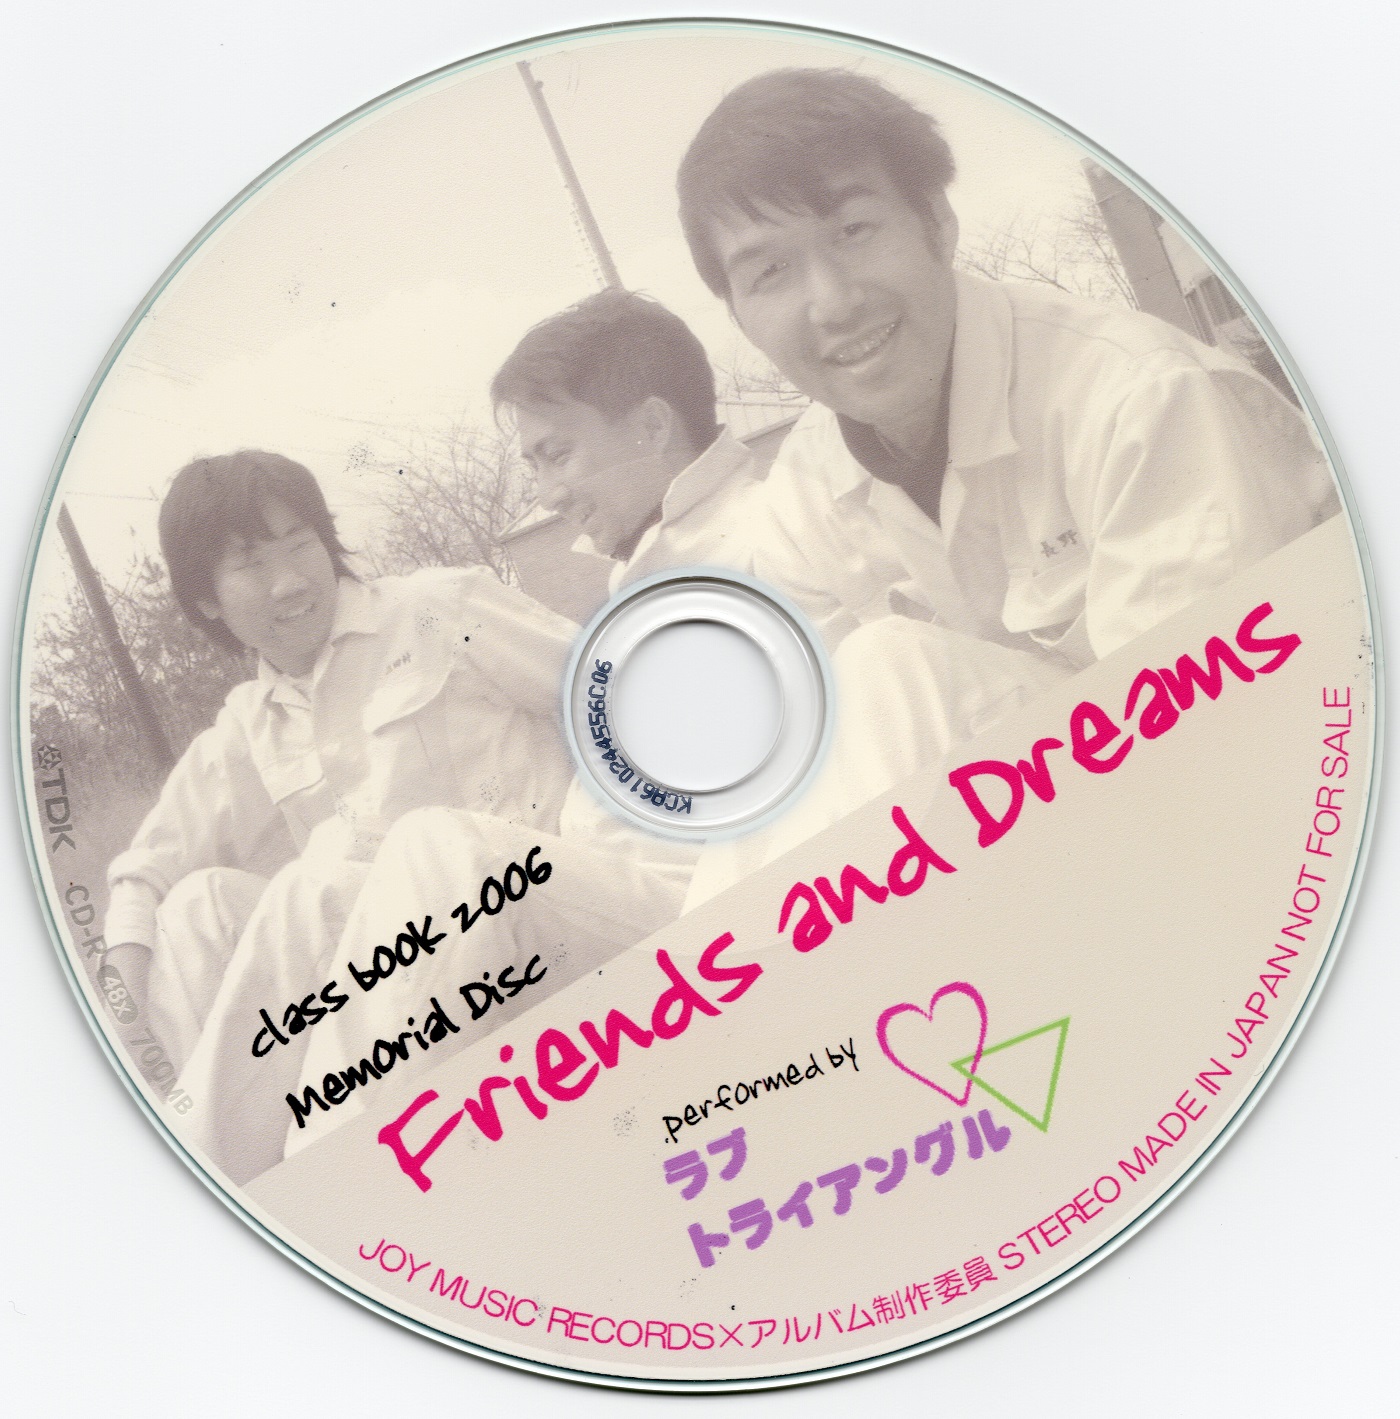 Friends and Dreams